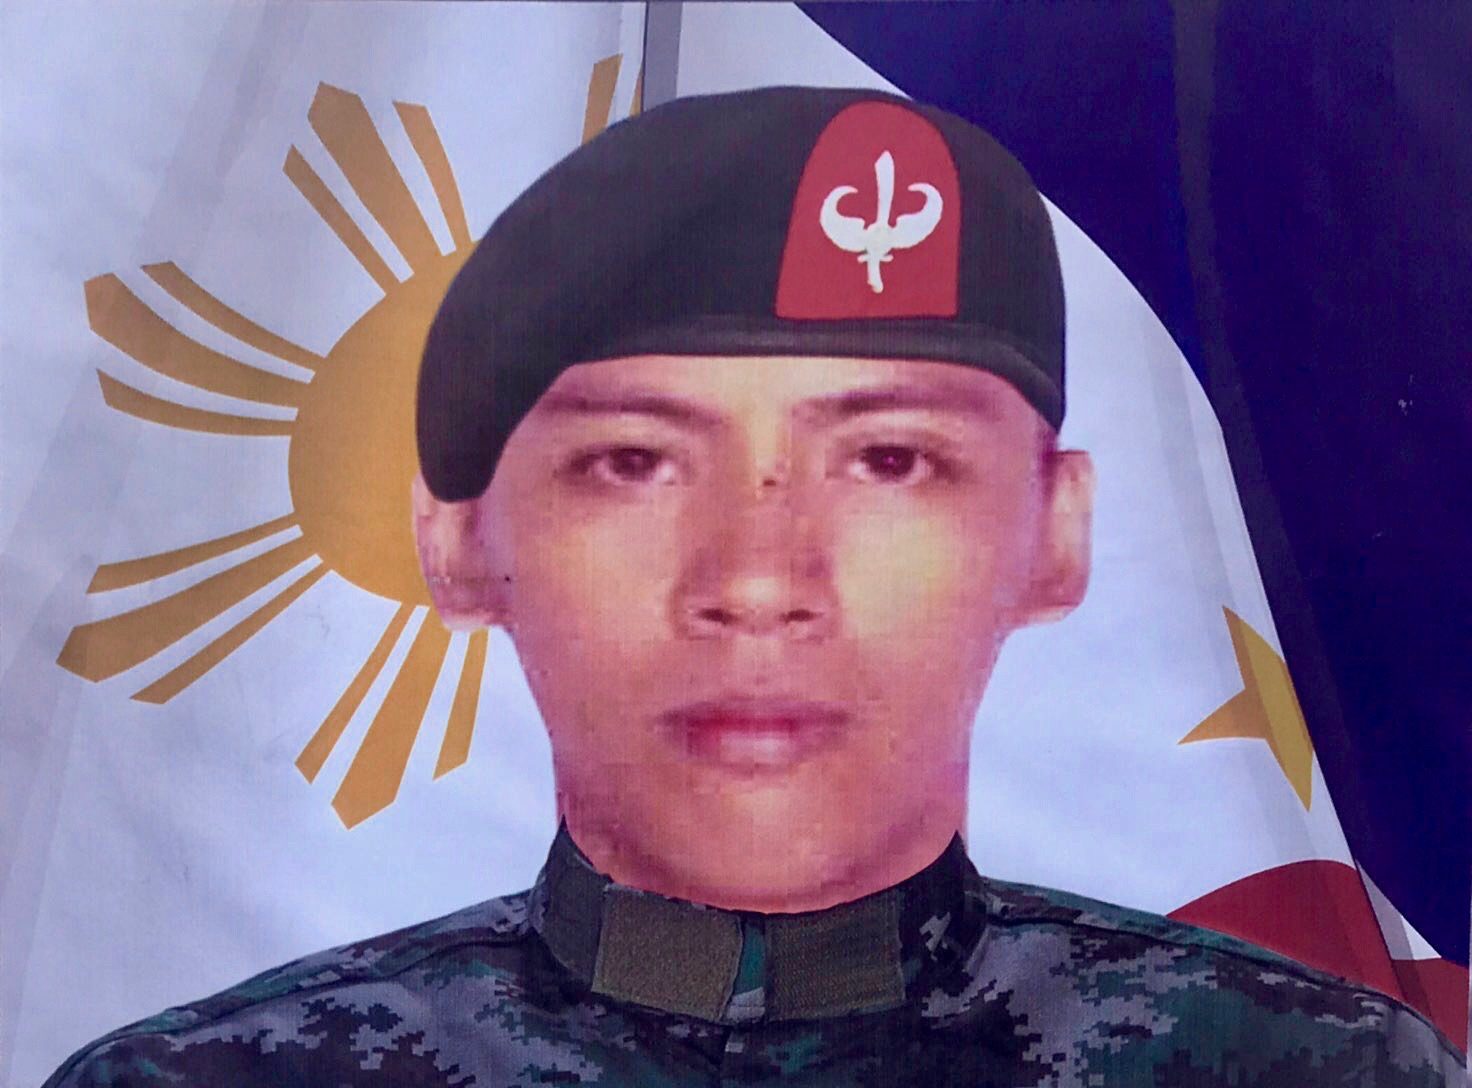 Alexis Laurente's SAF photo taken when he was admitted to the elite force. Photo courtesy of PNP-SAF 